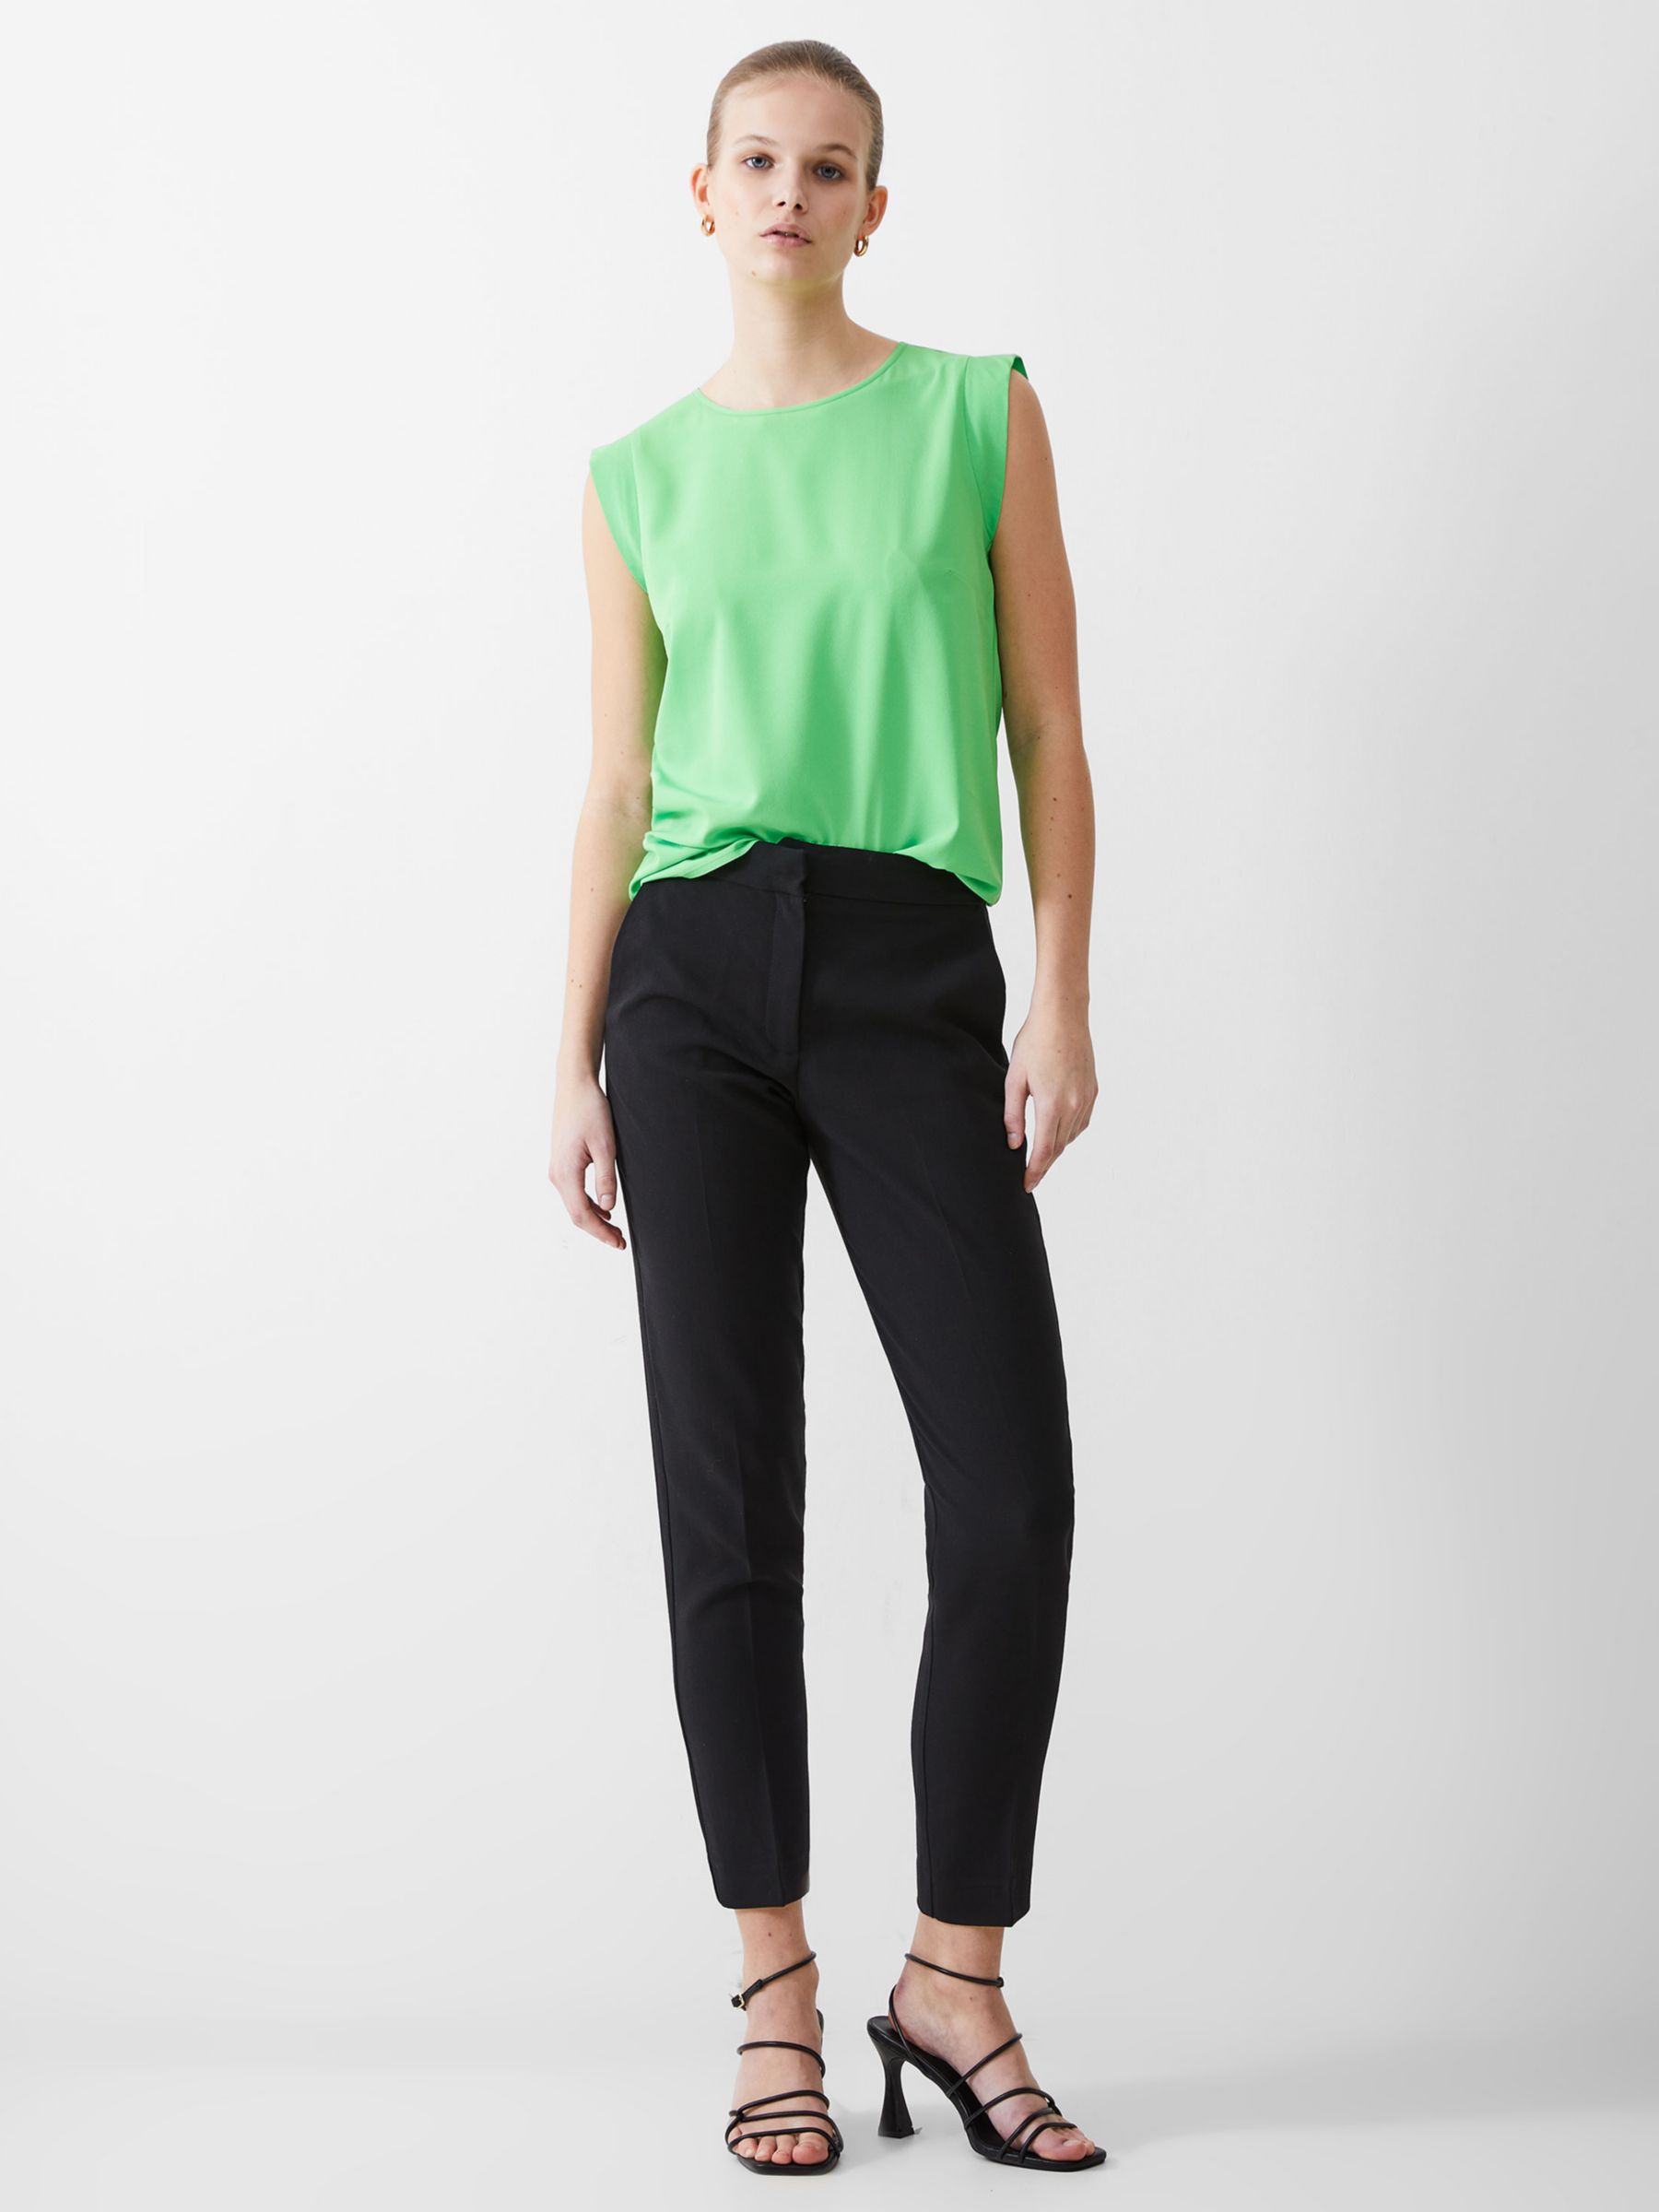 black tapered trousers womens